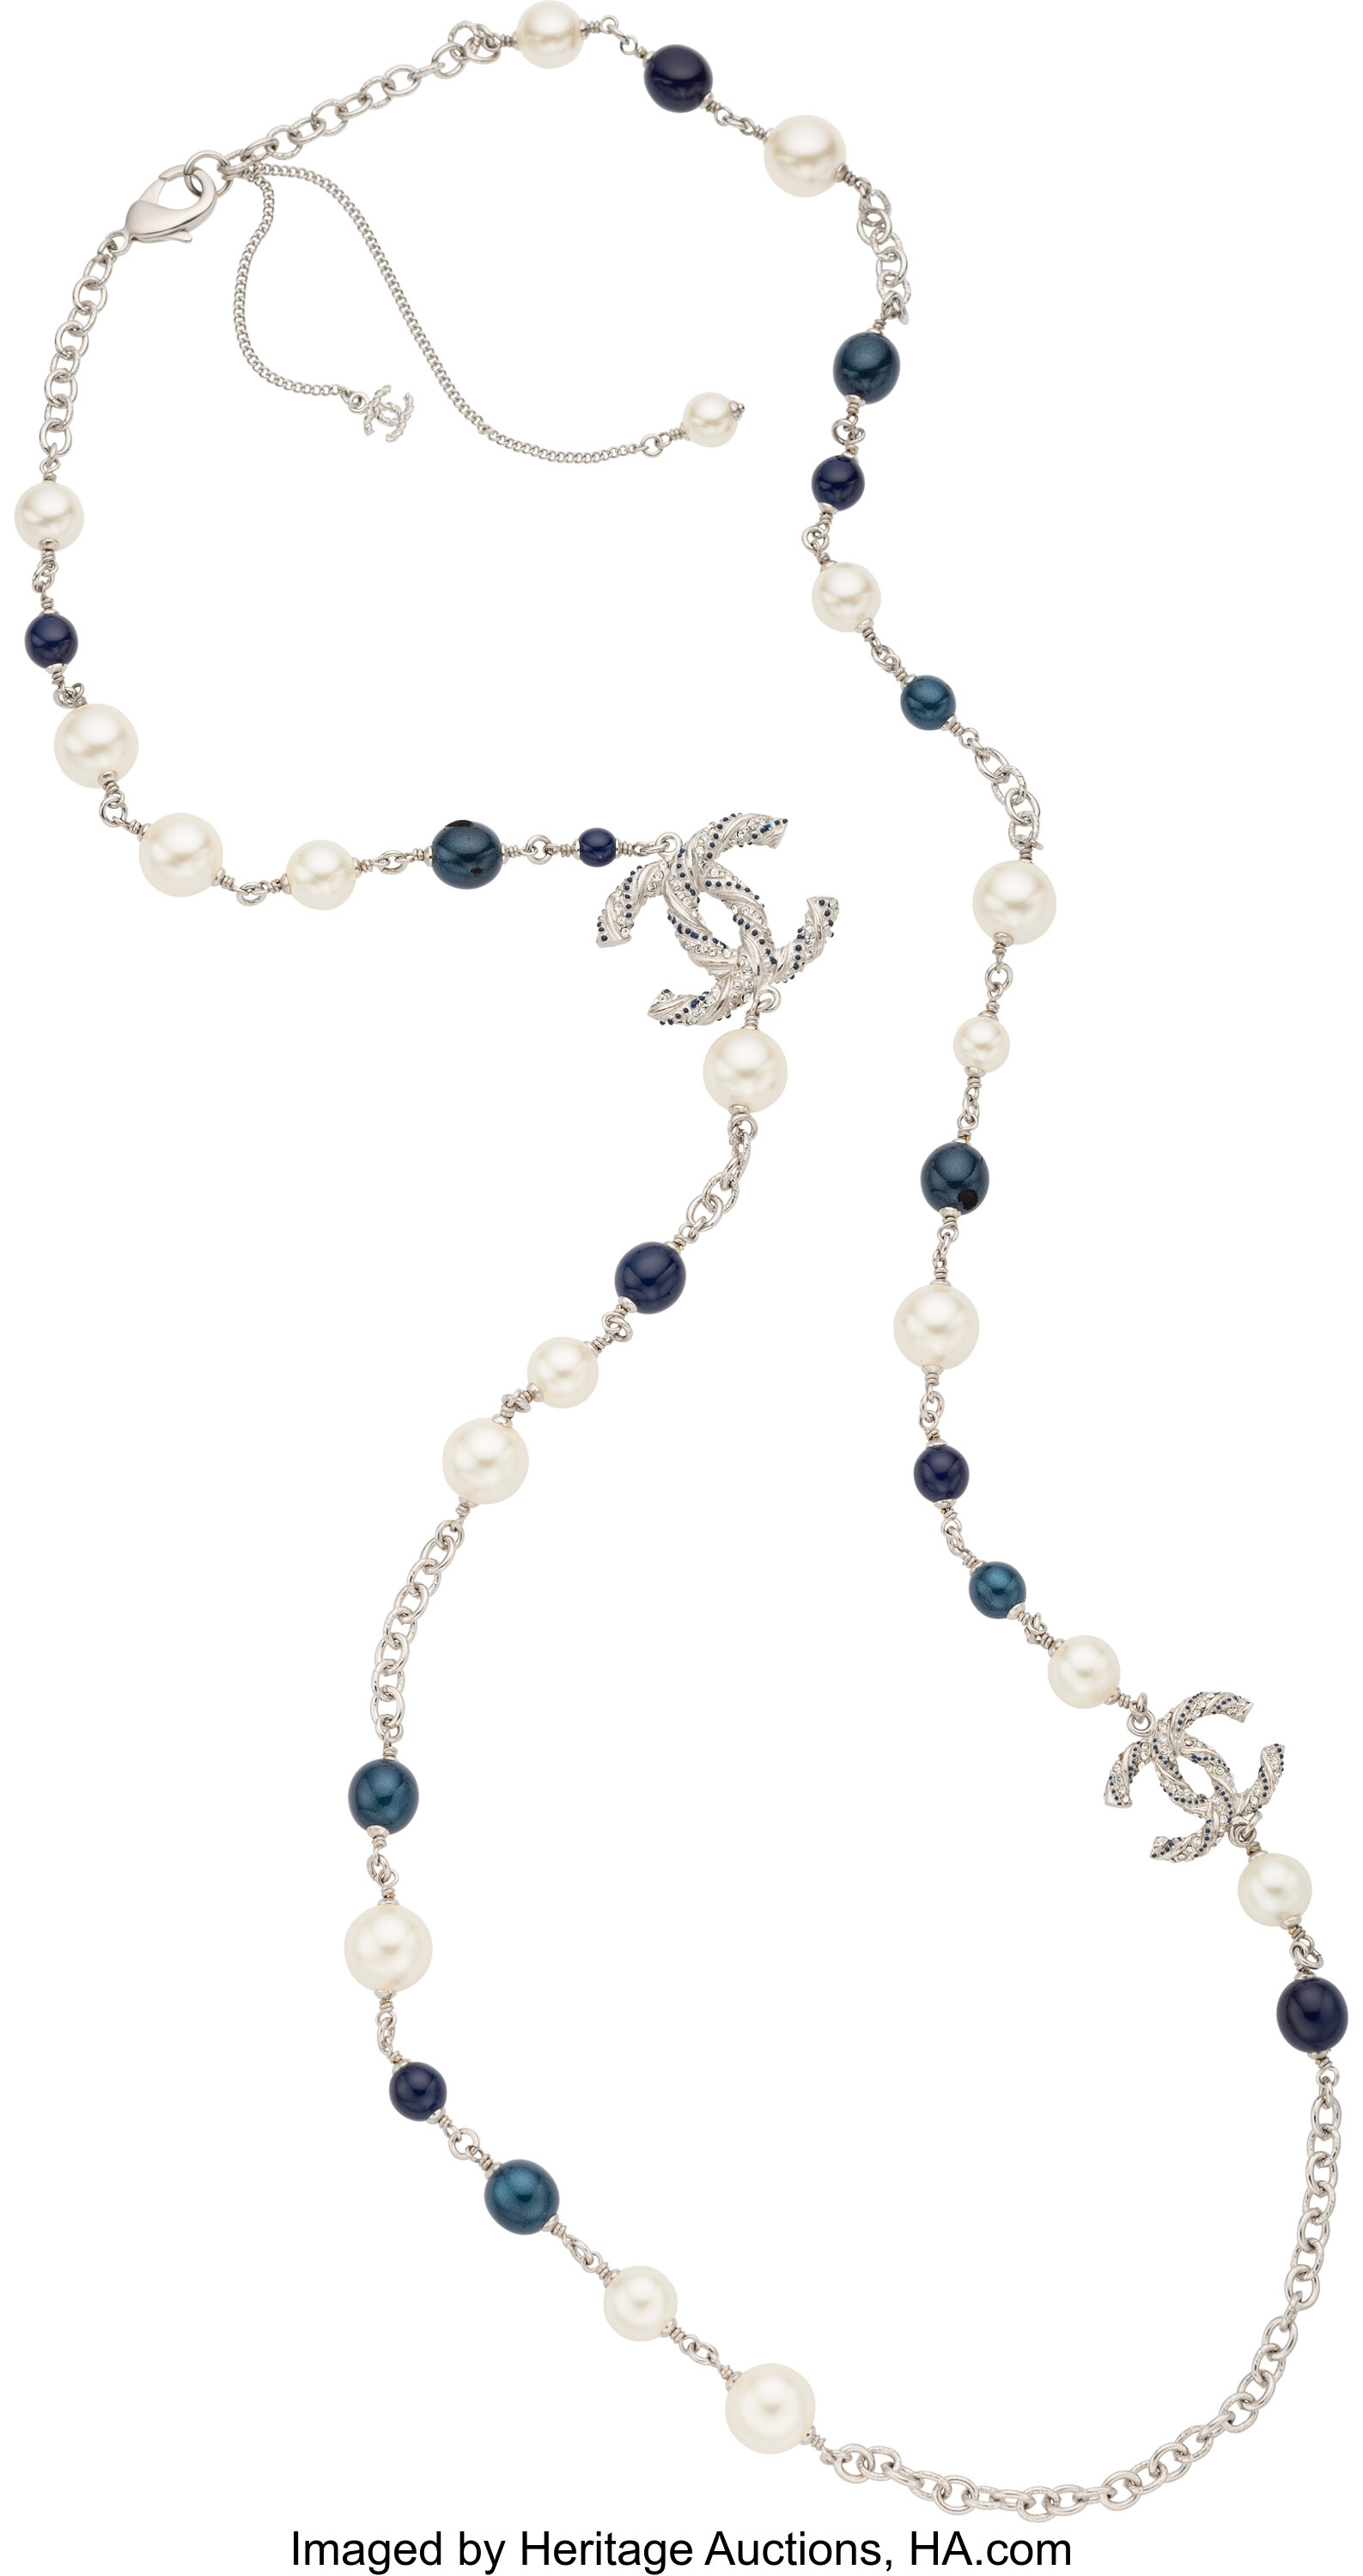 Chanel Faux Pearl, Blue Beads, and Crystals Single Strand Necklace., Lot  #58280